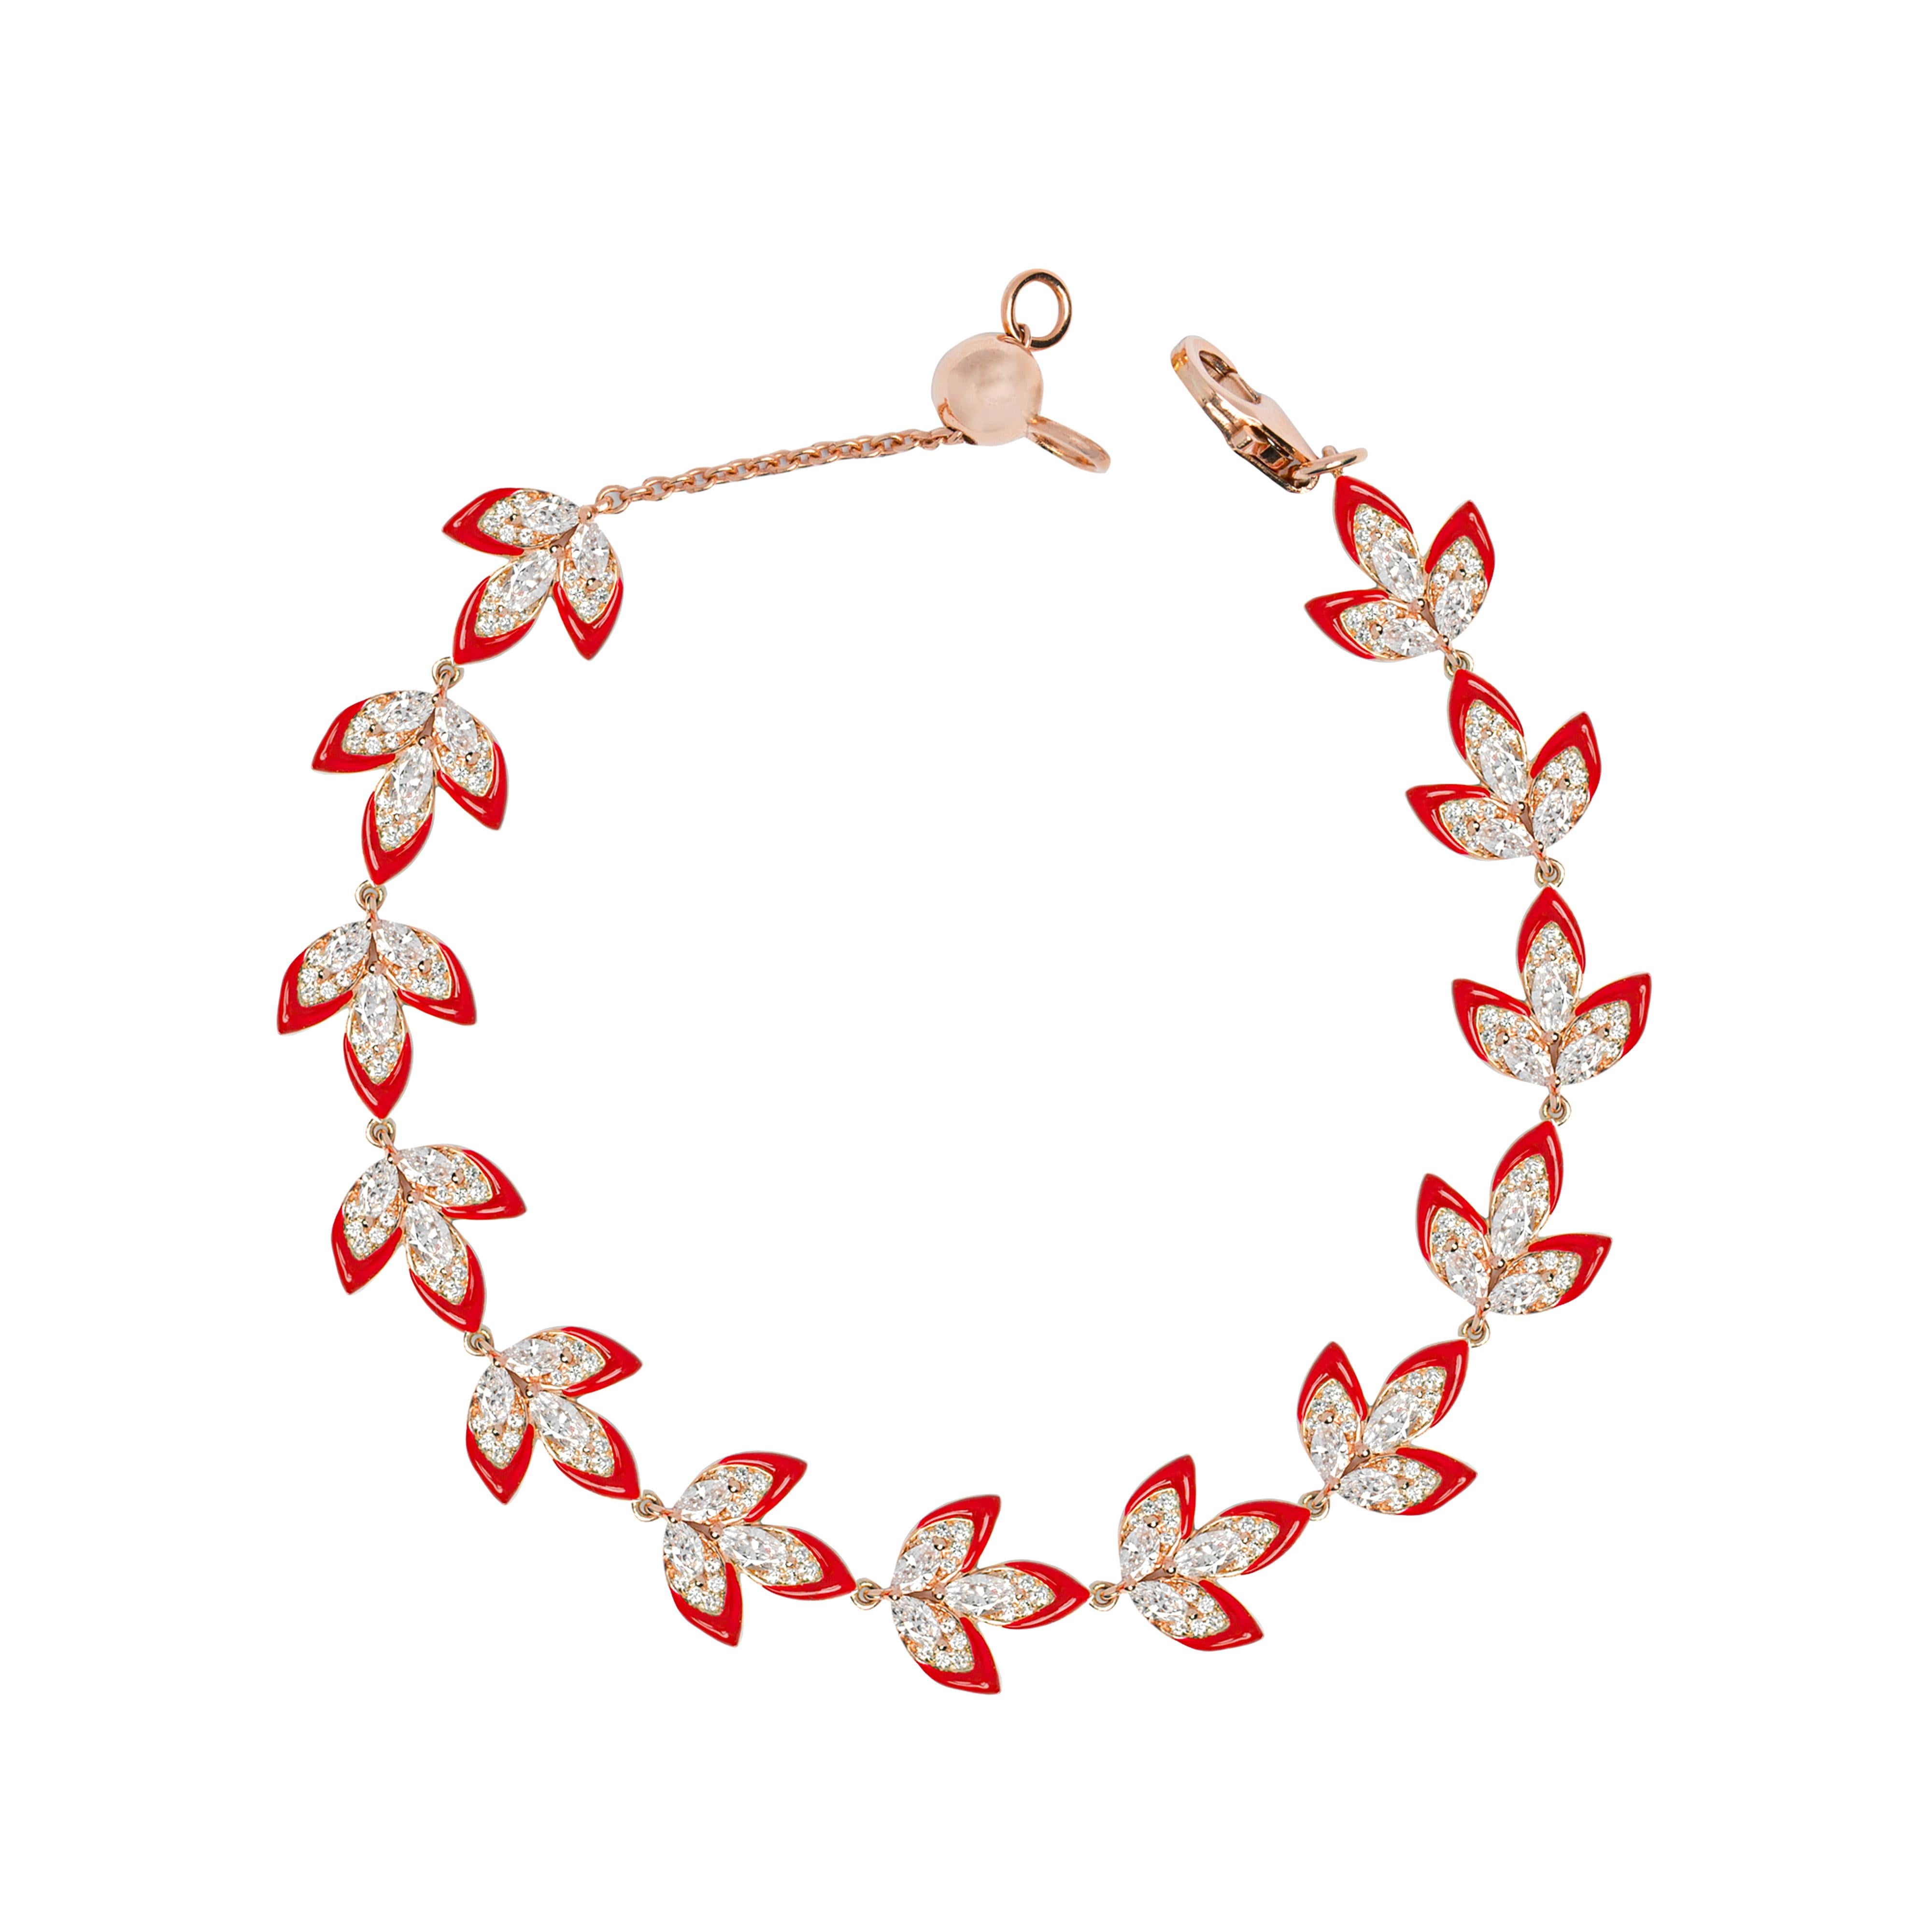 The leaf bracelet of  three round cut diamonds in the shape of a lead. This bracelet is made in 13.17 grams of 18K white gold or rose gold.

Available in any of the Kamyen signature colors. We at KAMYEN use a cold enameling technique to offer our 9